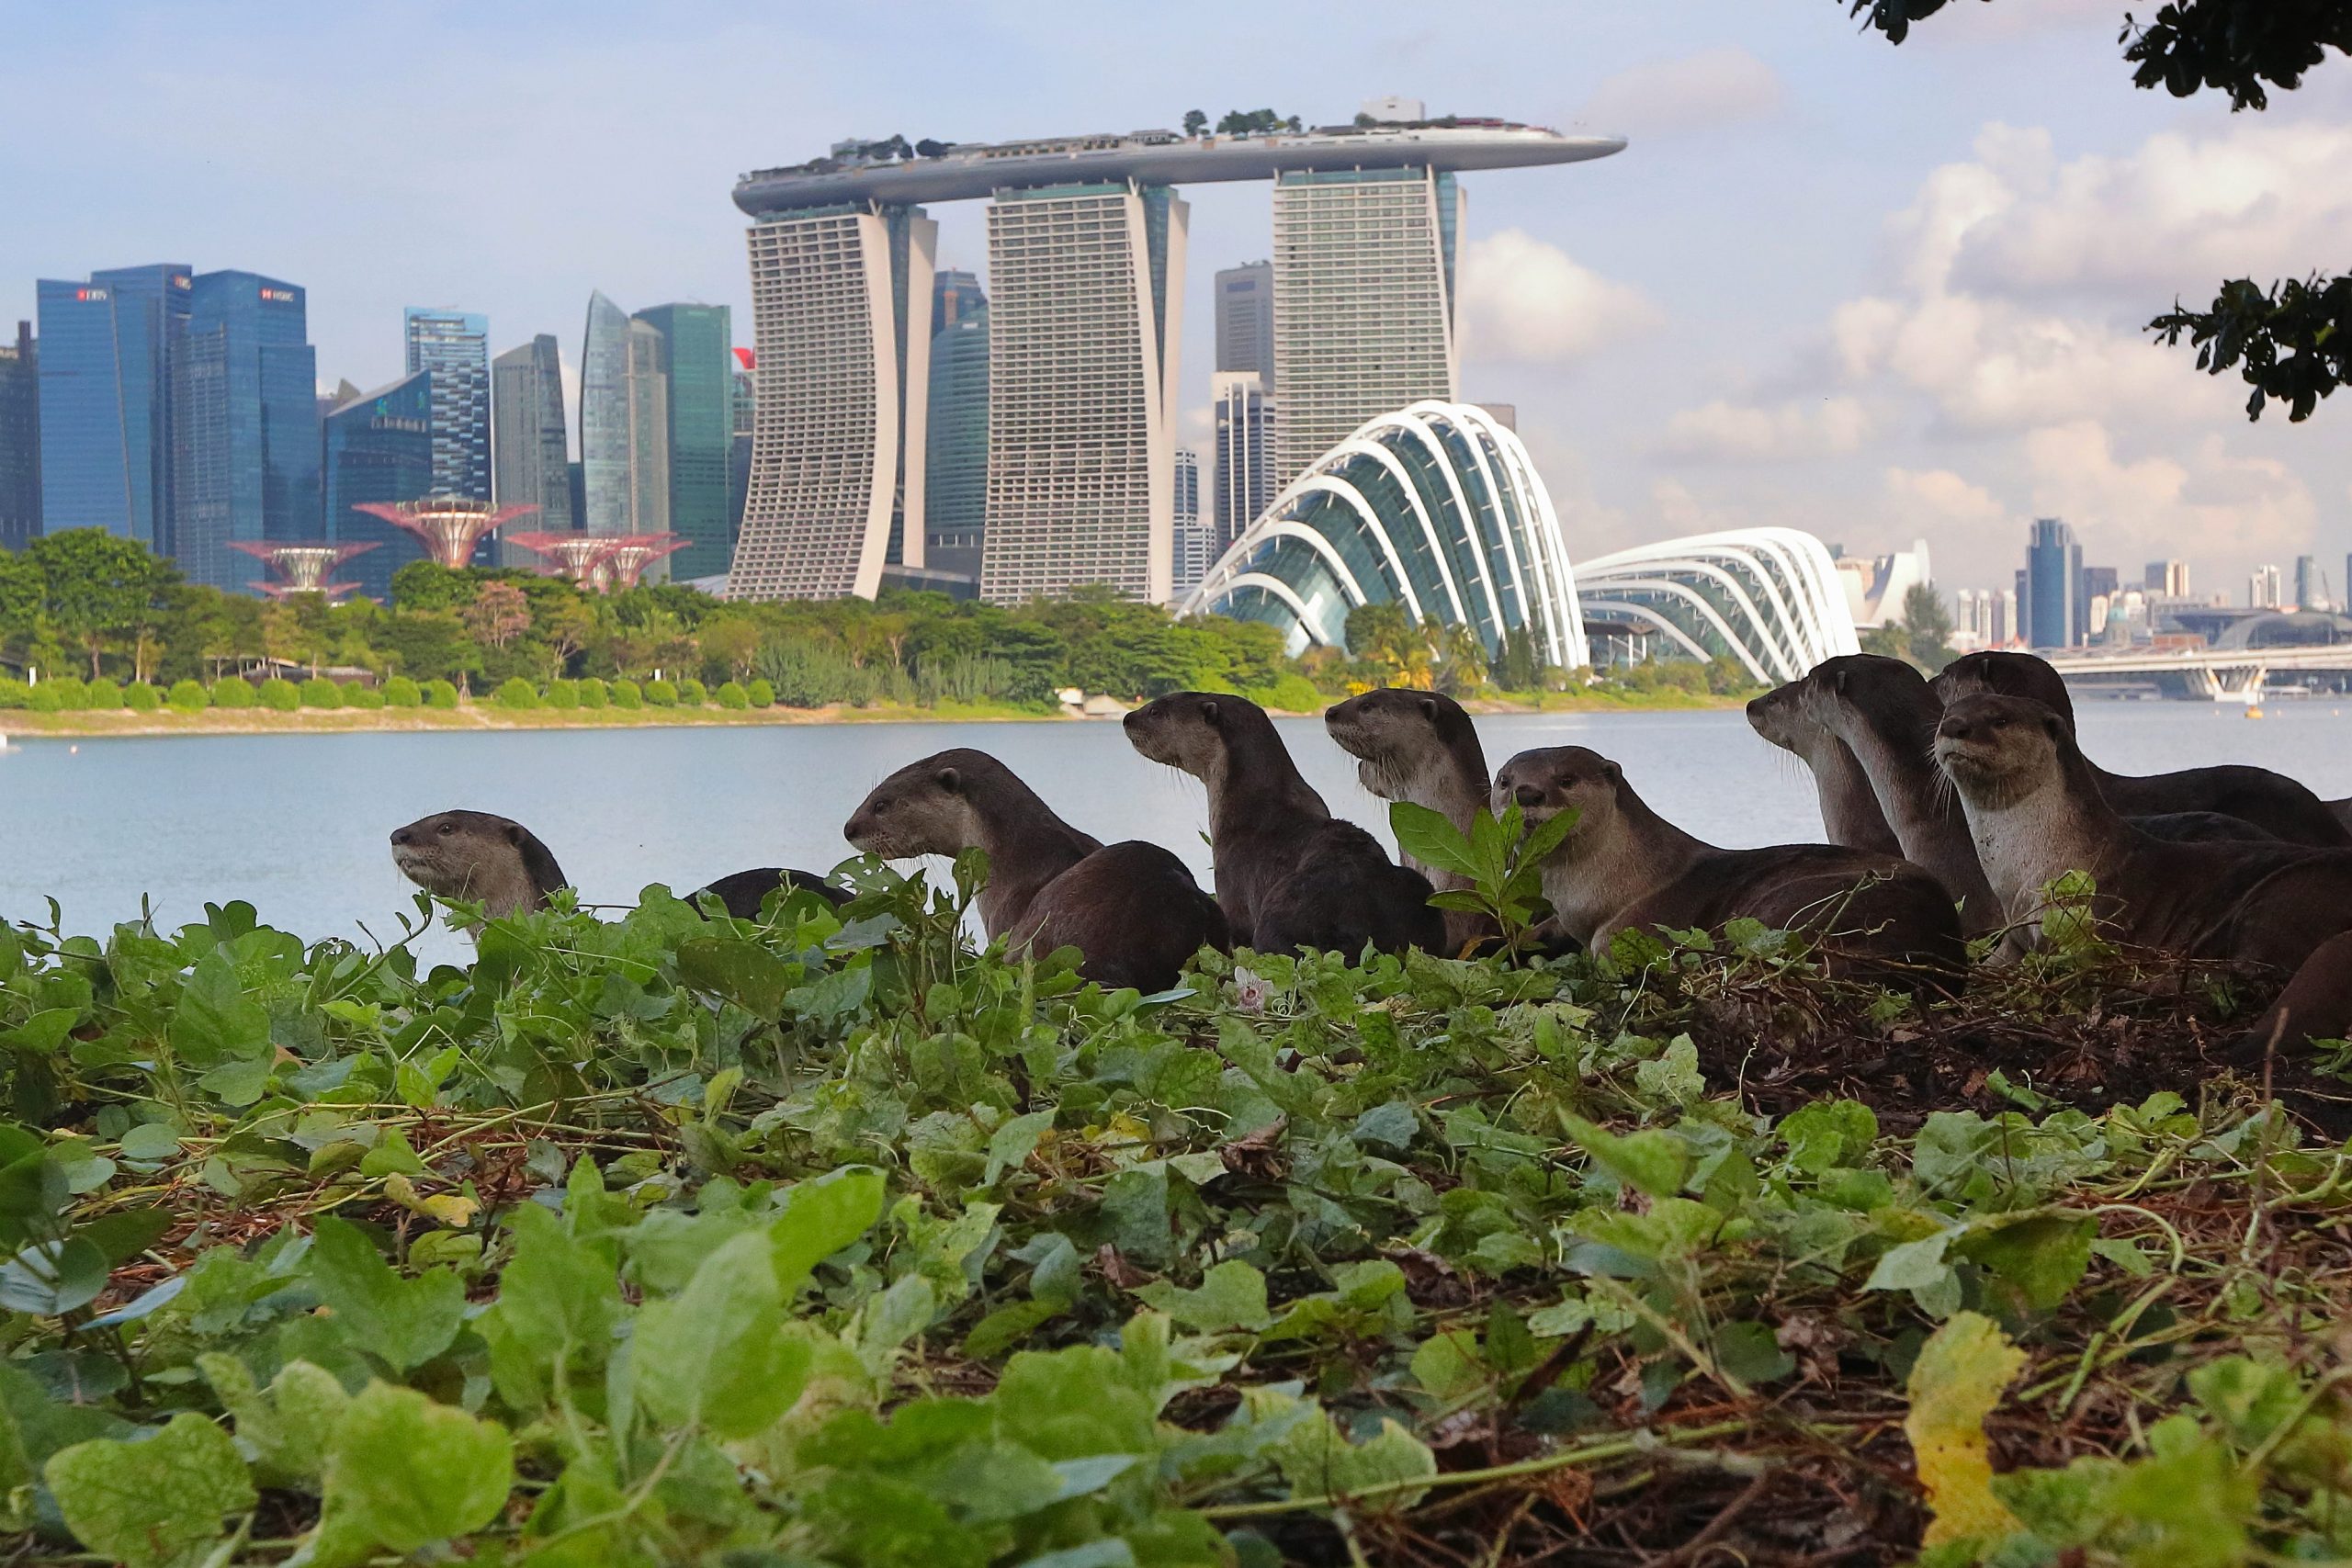 Singapore otters with Marina Bay Sands hotel in background